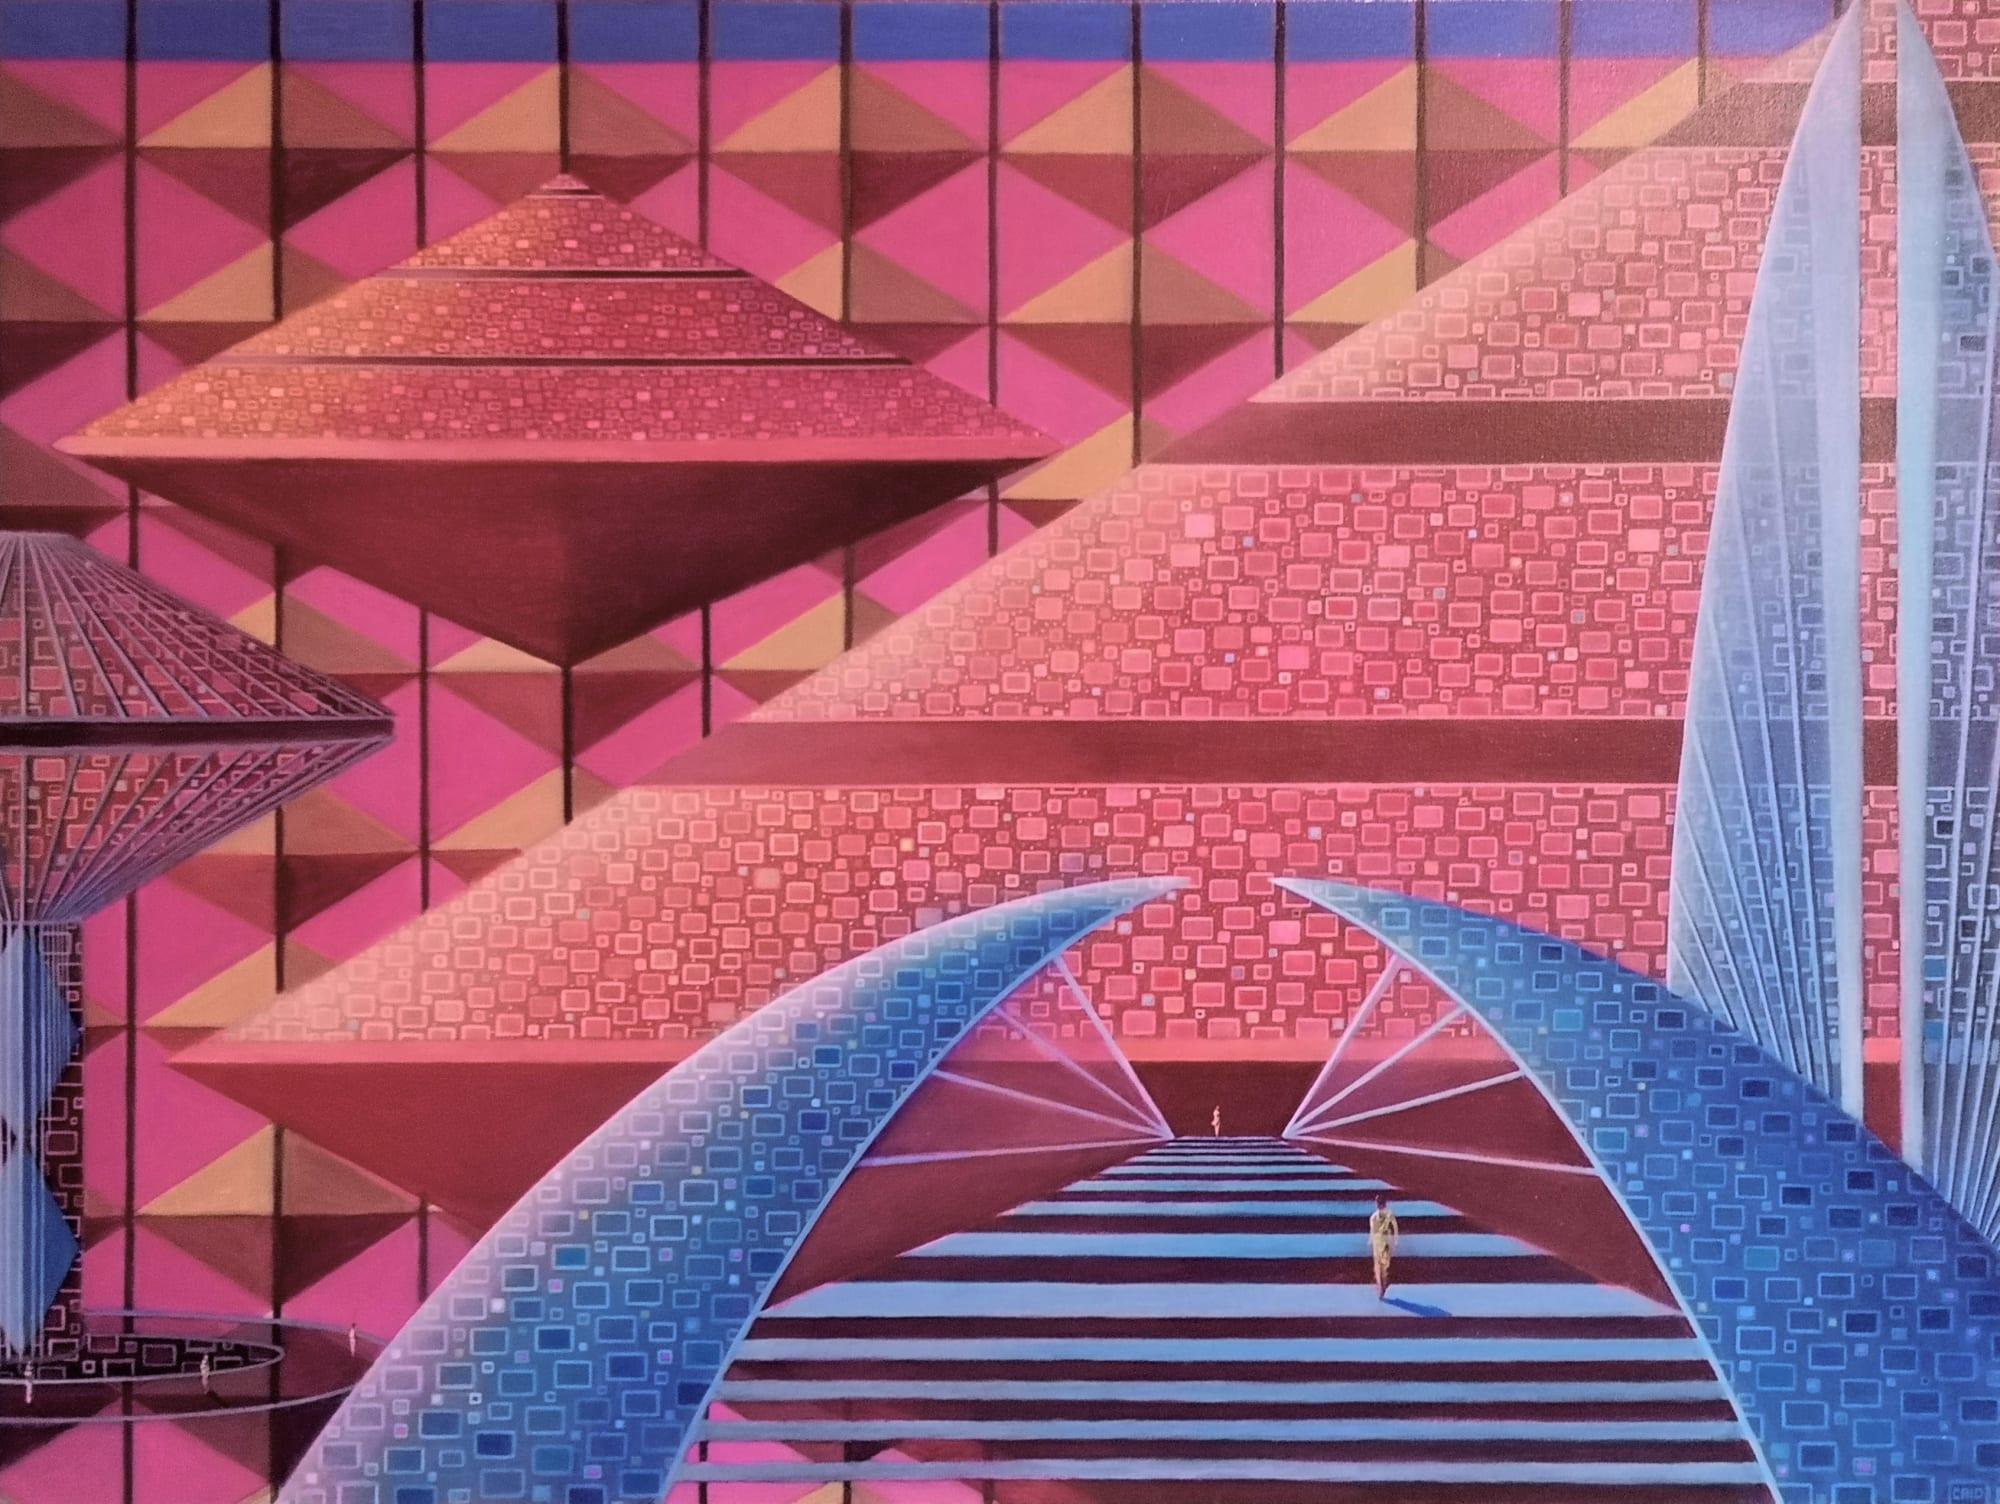 Caio Locke's painting "Nebula" (2019) transports viewers to a mesmerizing futuristic cityscape, expertly rendered with a captivating blend of acrylic and oil on canvas. The artwork immerses us in a visionary world where architecture and imagination